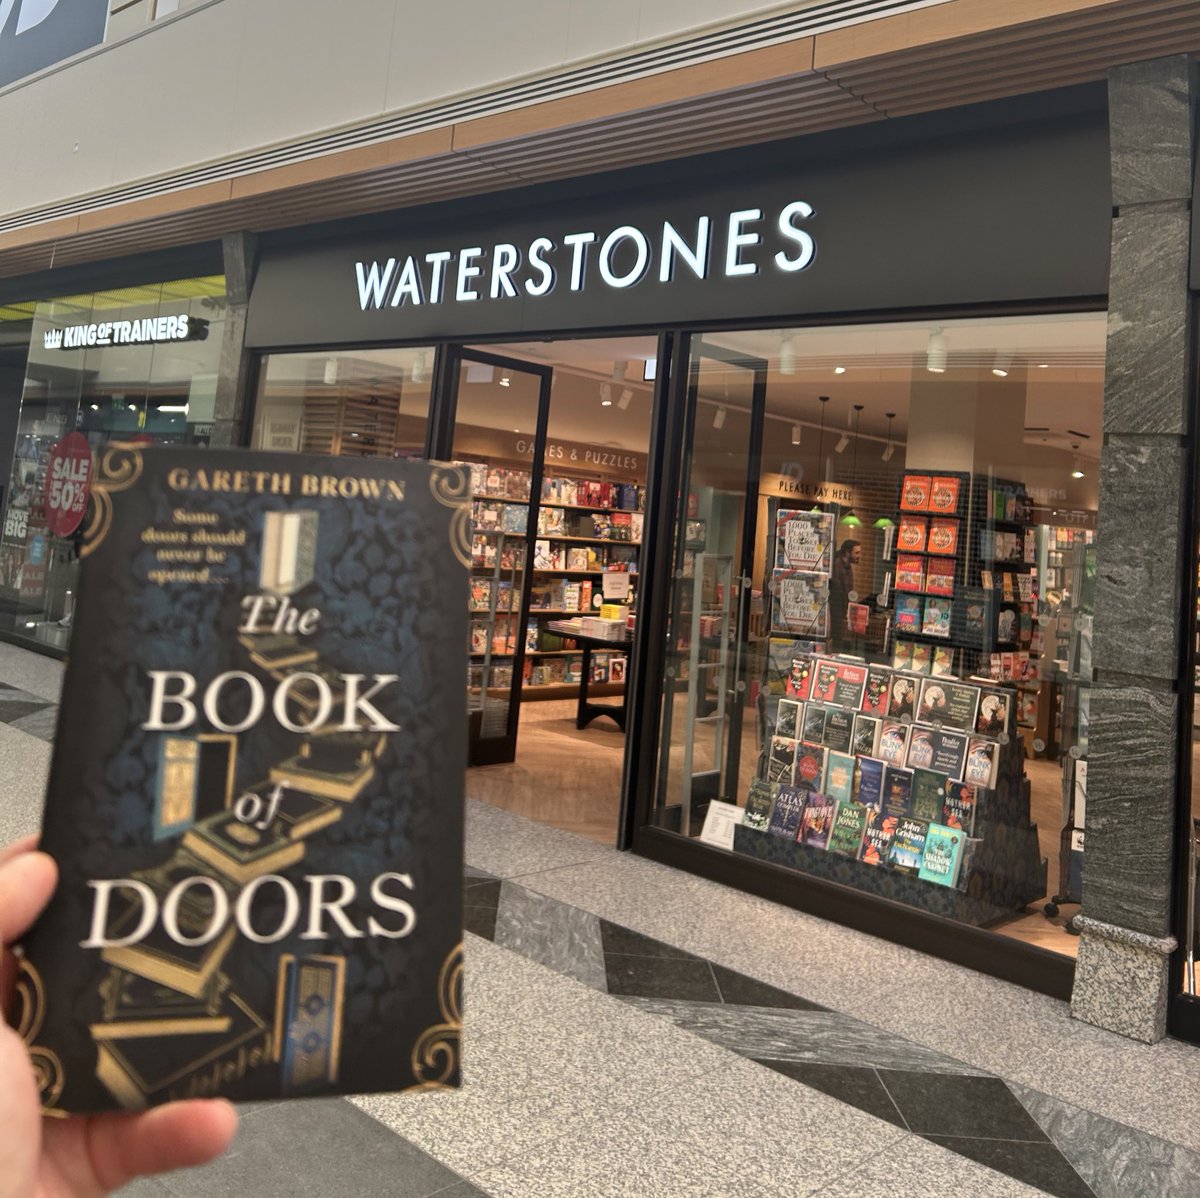 Last but certainly not least on proof drop tour of Edinburgh is a stop at @WstonesEdinGyle - a recently opened bookshop which is enjoyably near to my work! How convenient… 

#thebookofdoors @TransworldBooks